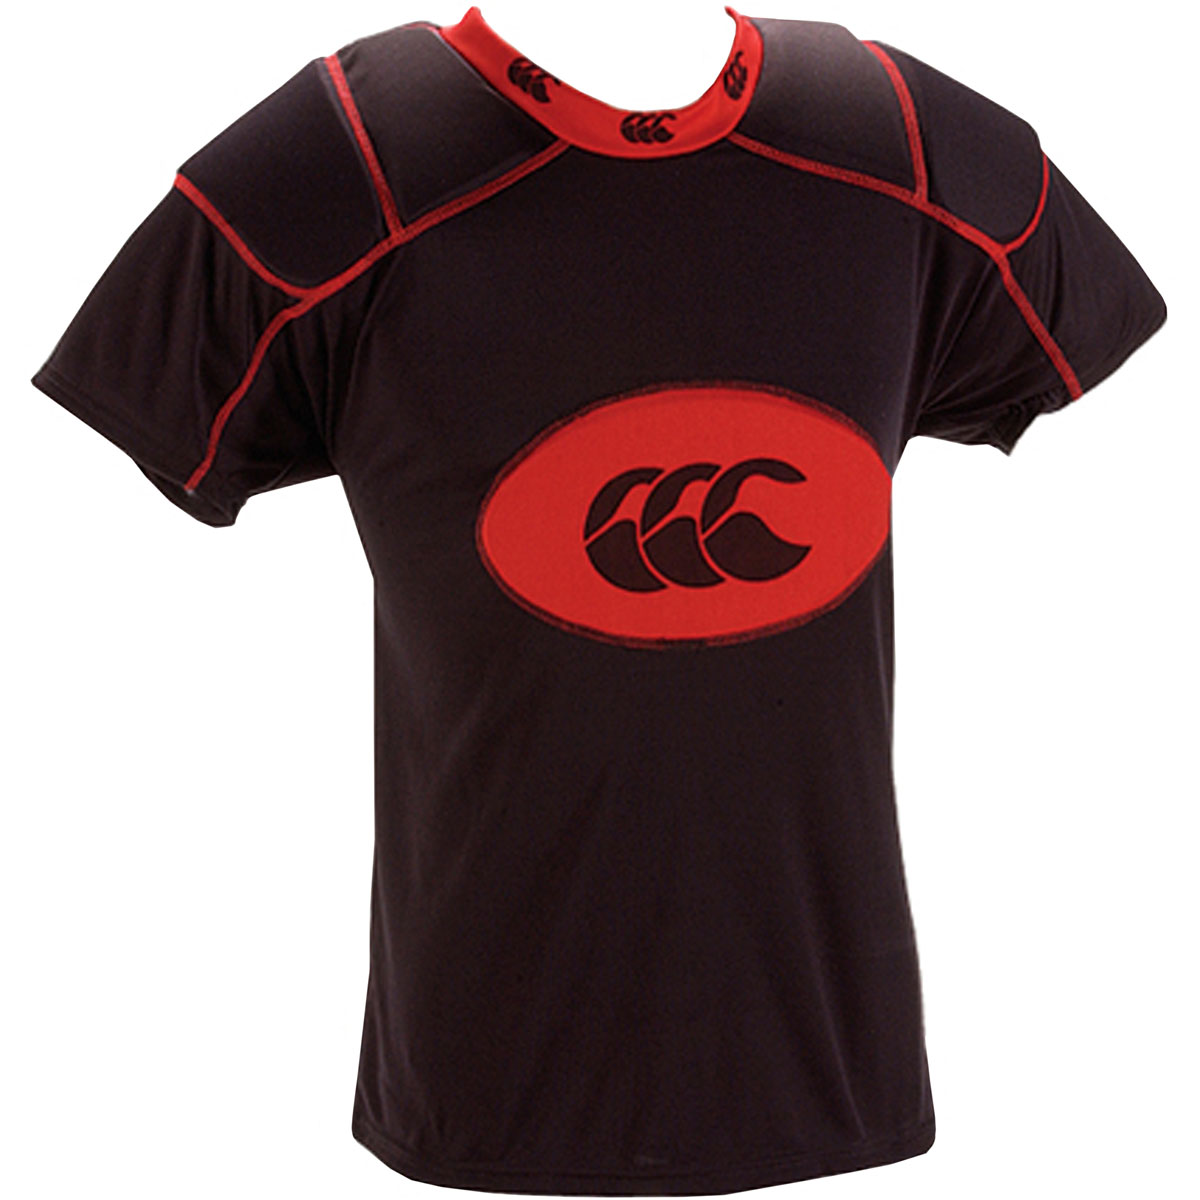 Canterbury IRB approved Rugby padded shoulder vest. Adult Size